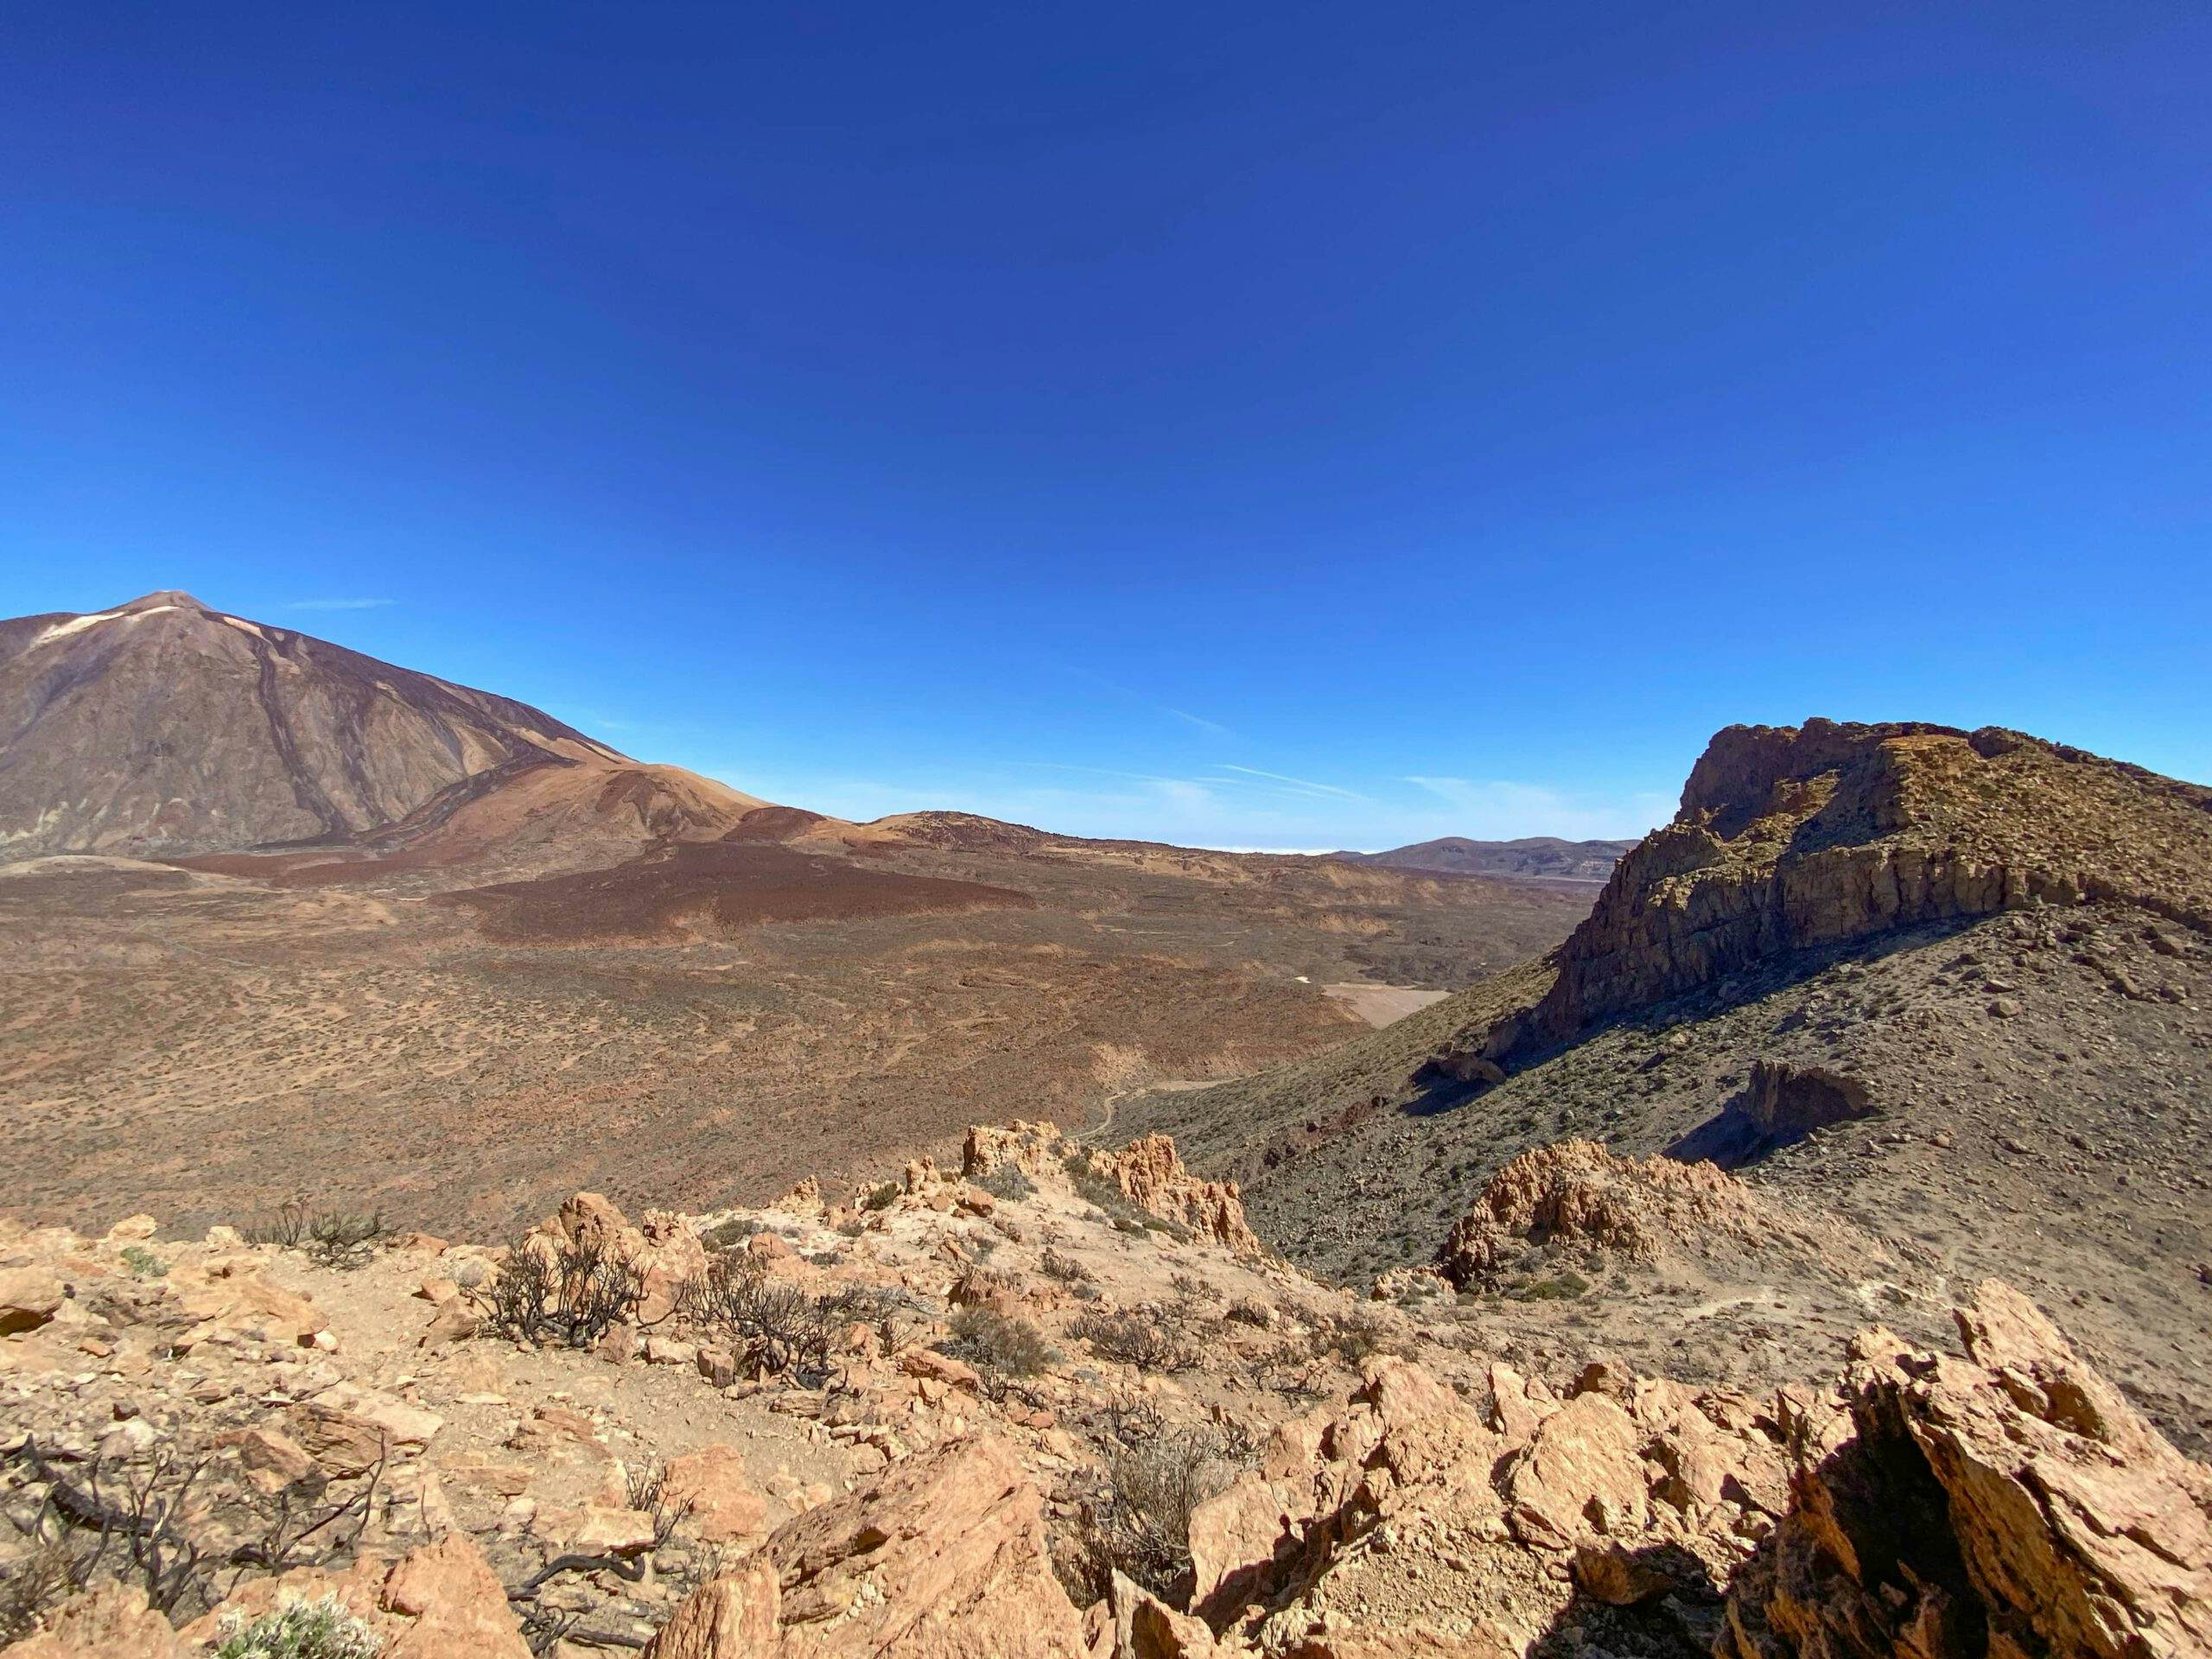 View from the Siete Cañadas hiking trail across to Teide